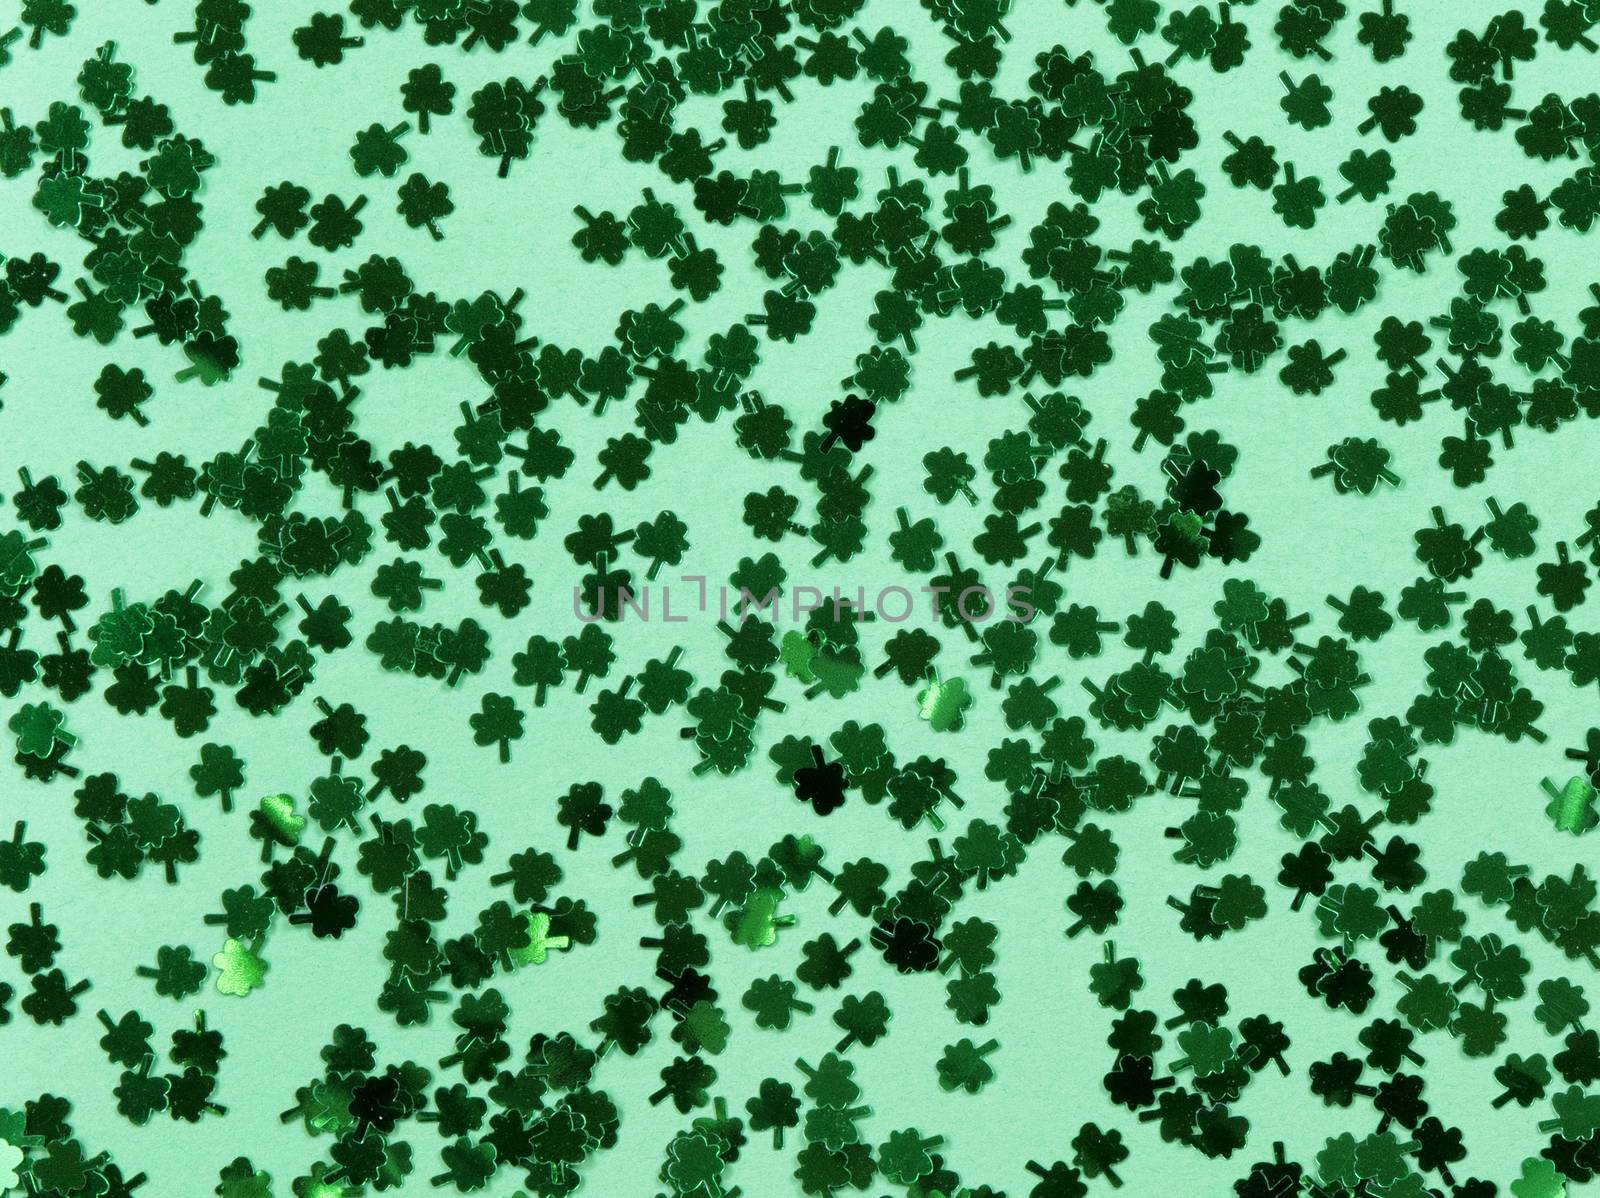 St Patricks Day with shamrocks on green background in filled fra by tab1962